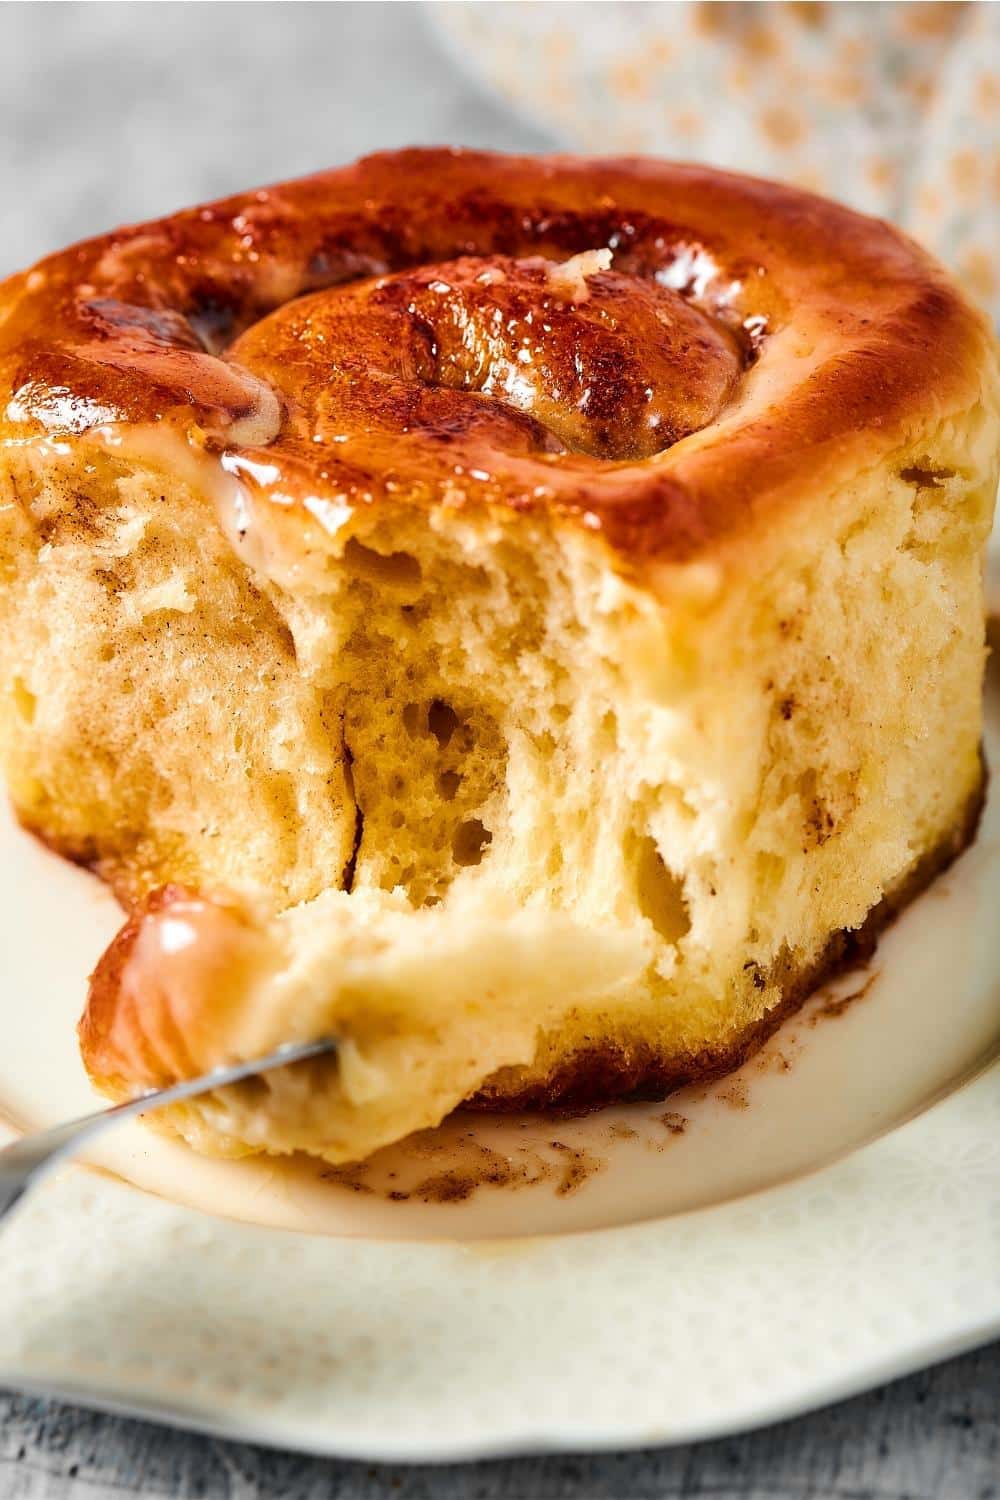 A cinnamon roll on a white plate. A fork is pulling away a piece form the front of the cinnamon roll.